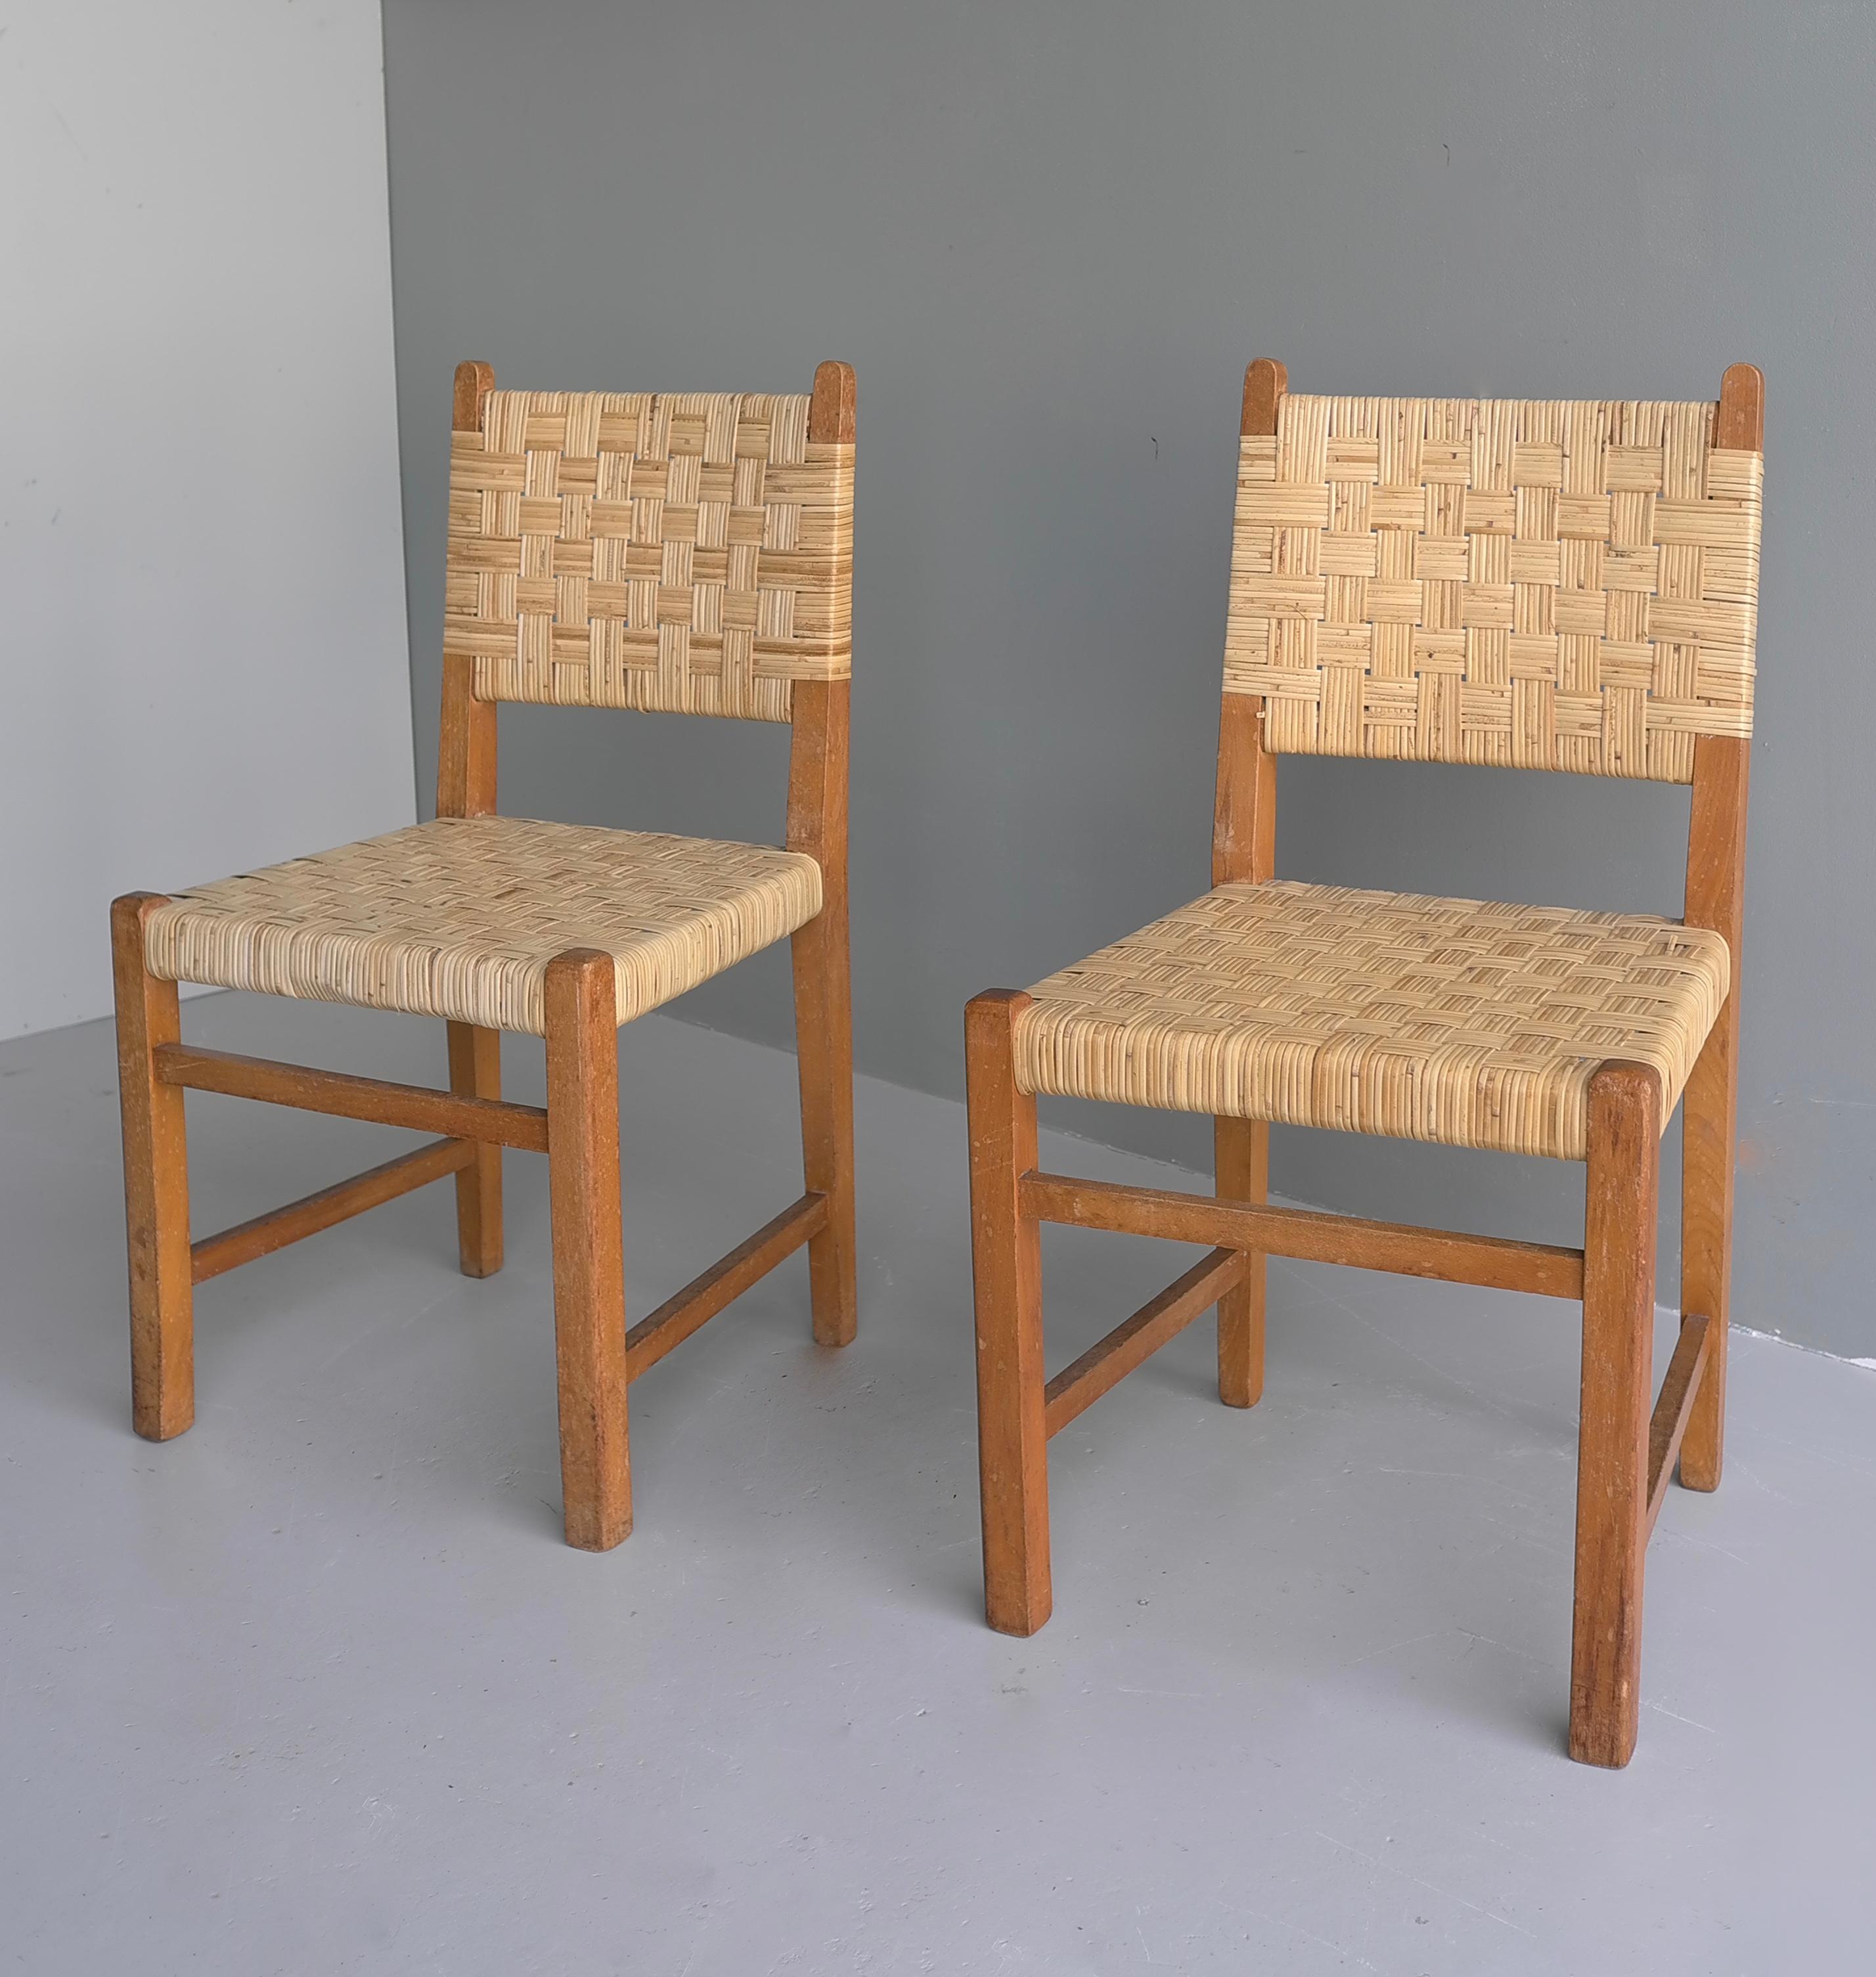 Pair of oak chairs with cane upholstery in style of Pierre Jeanneret.